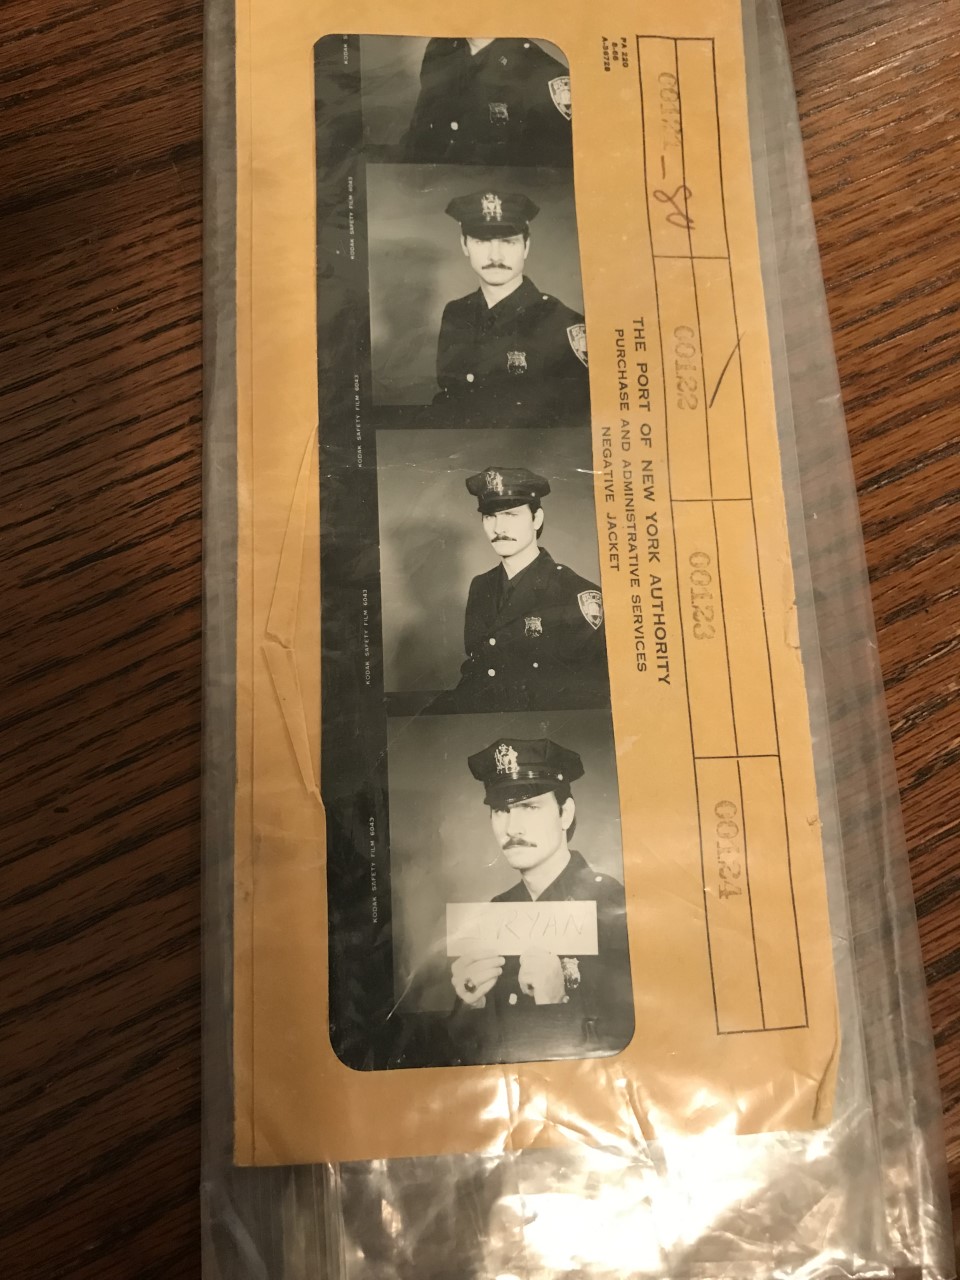 A strip of photos show a mustached man in a police uniform and hat